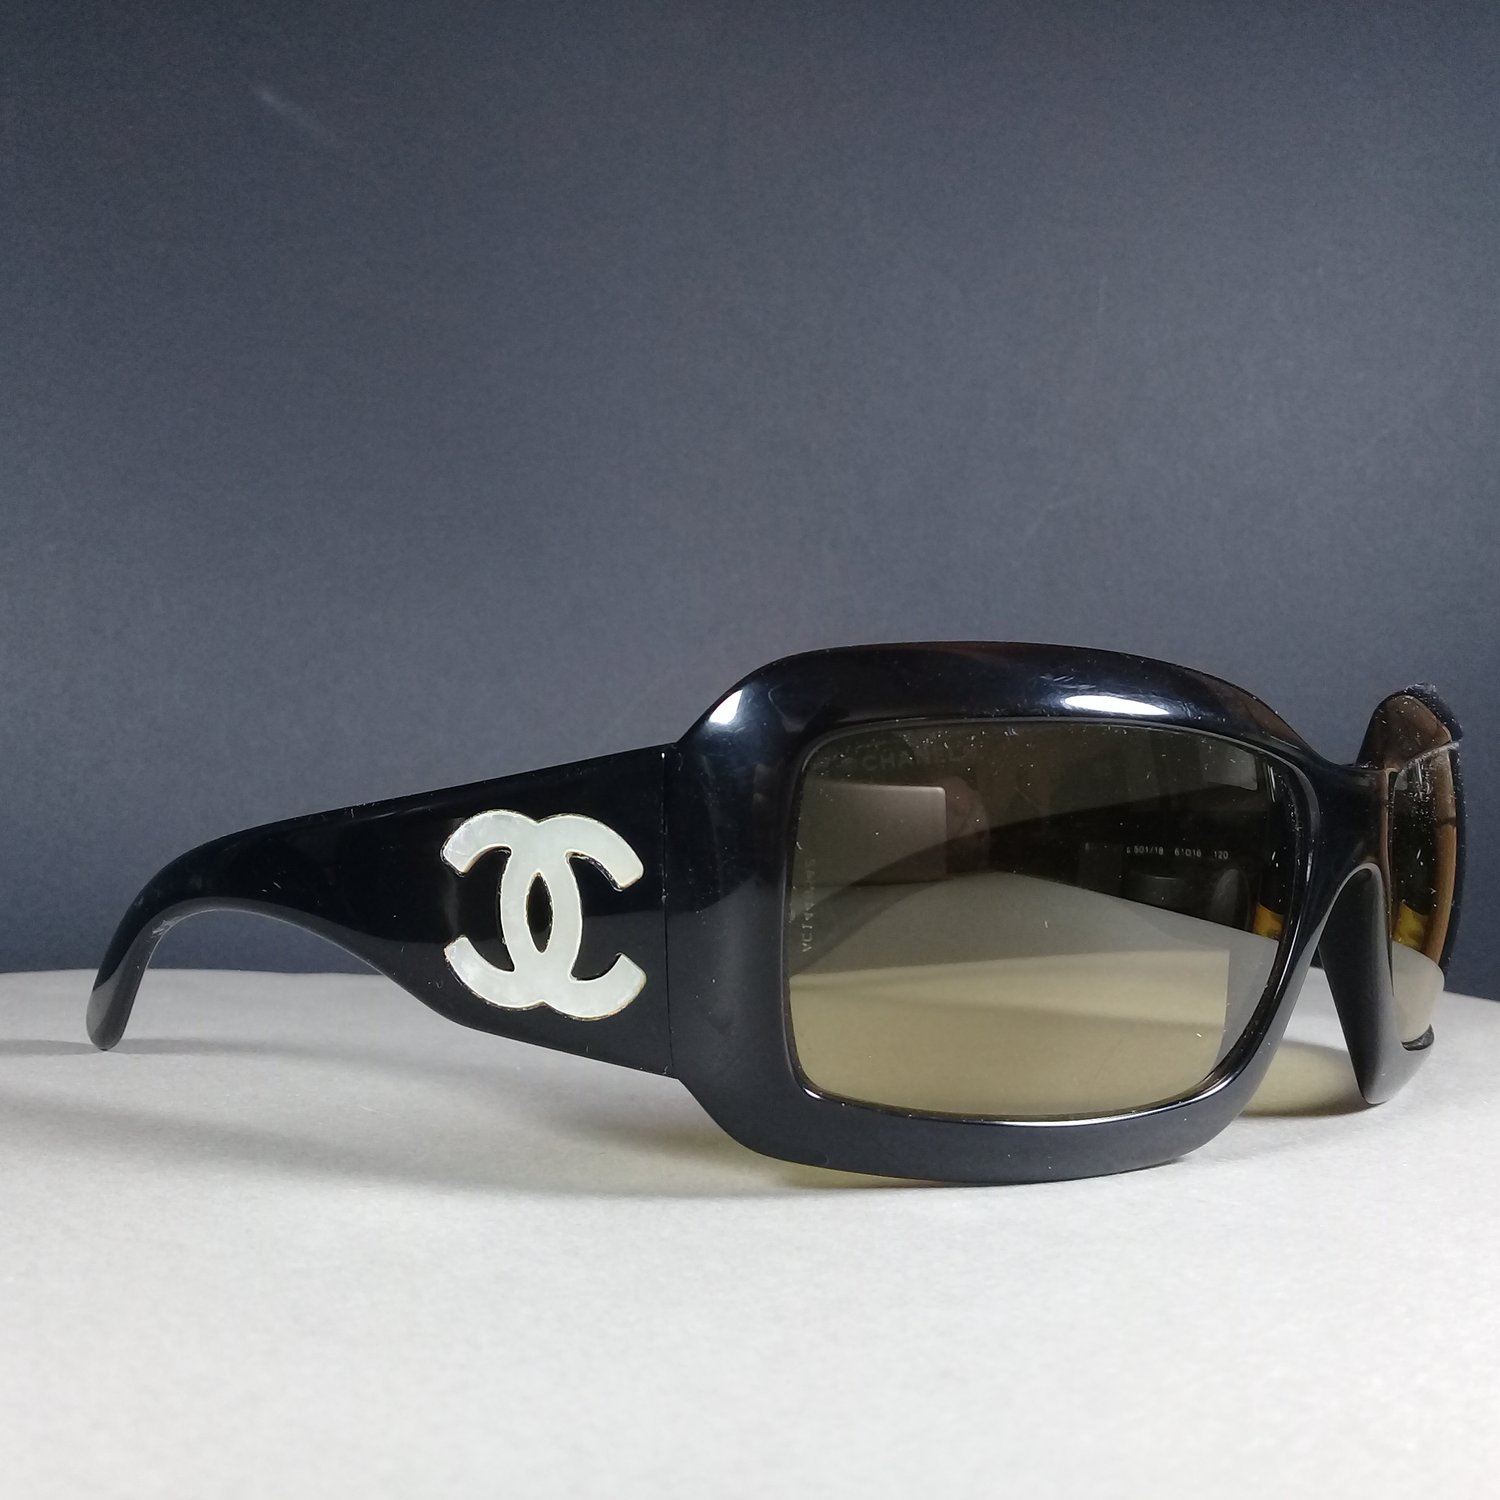 Chanel 5076-H 501/11 120 Black/Yellow Mother of Pearl CC Logos